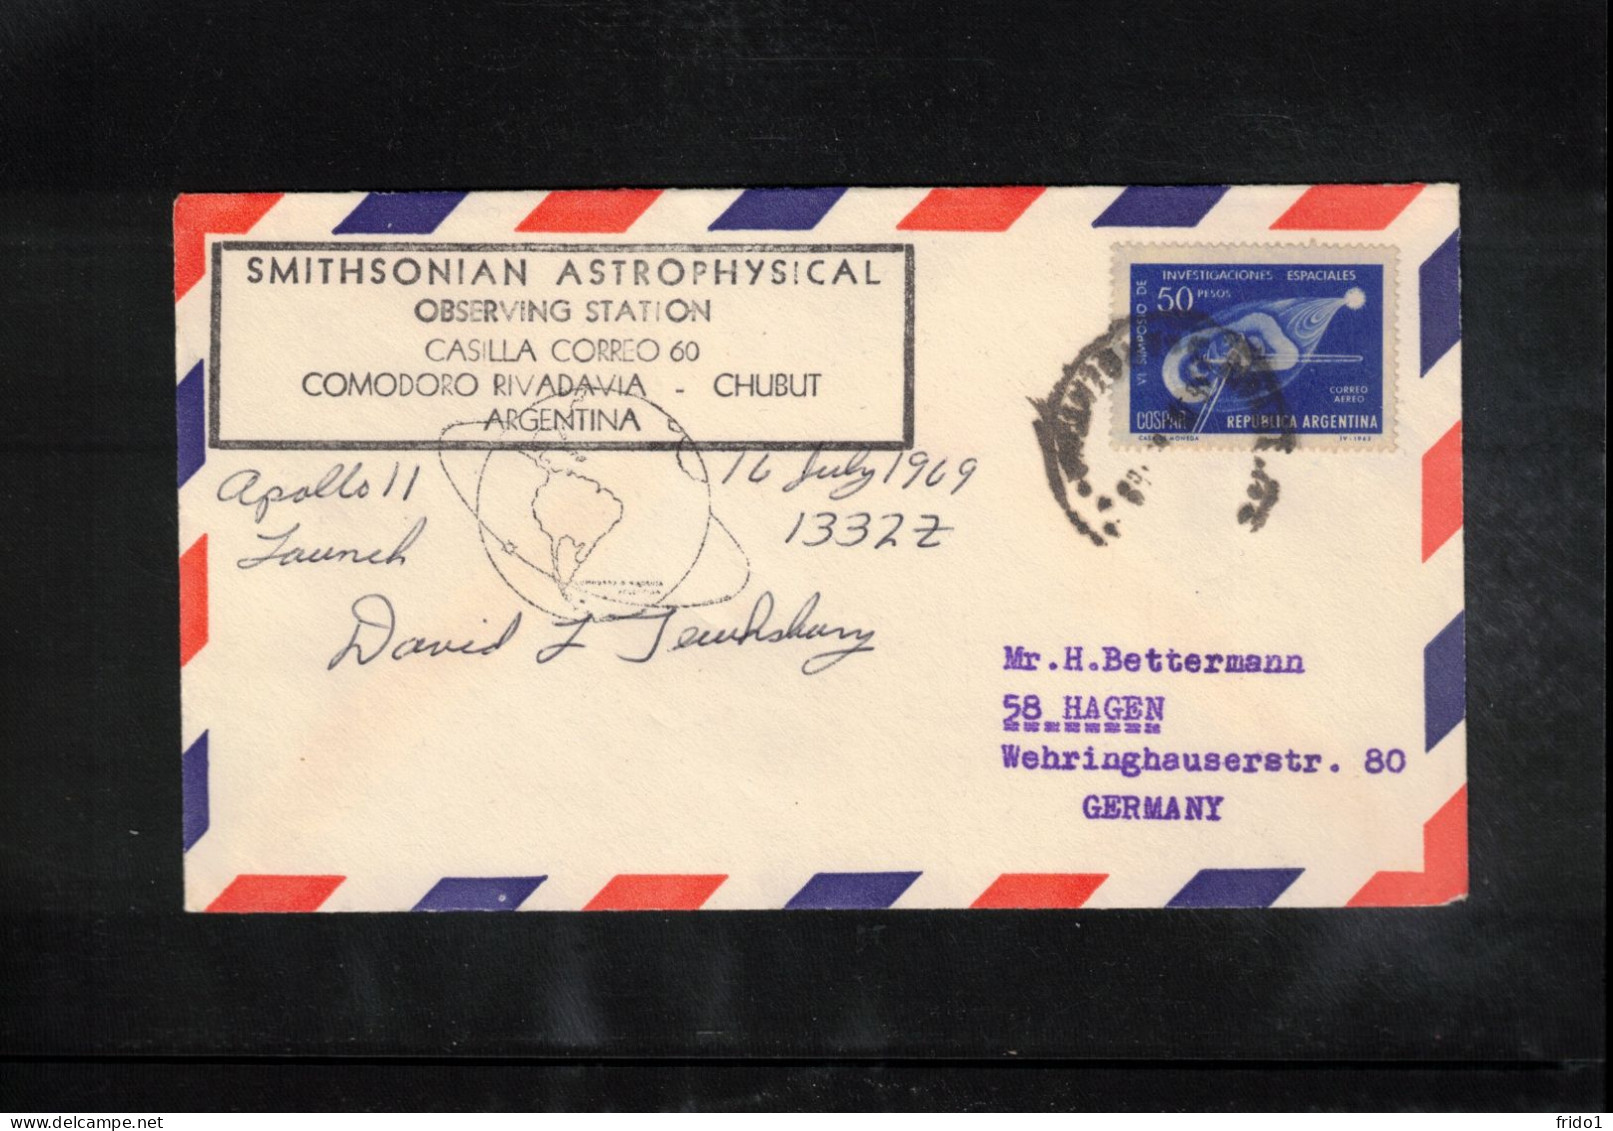 USA 1969 Space / Weltraum - Apollo XI - Smithsonian Astrophysical Observation Station Argentina Interesting Cover - Verenigde Staten